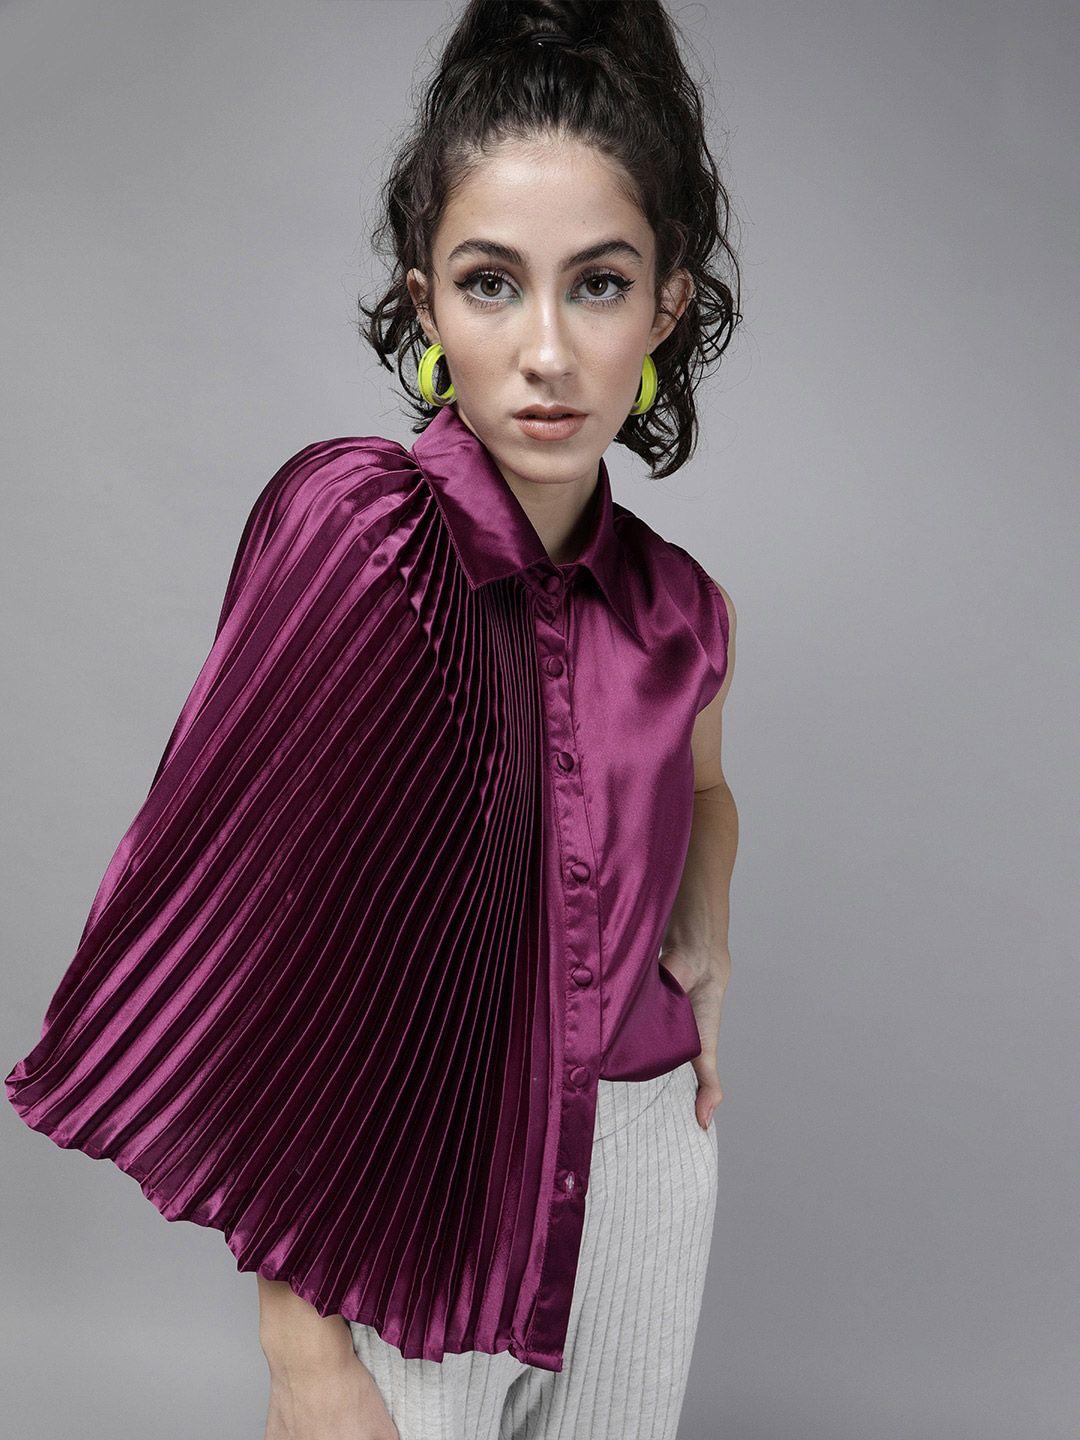 the dry state accordion pleats satin shirt style top